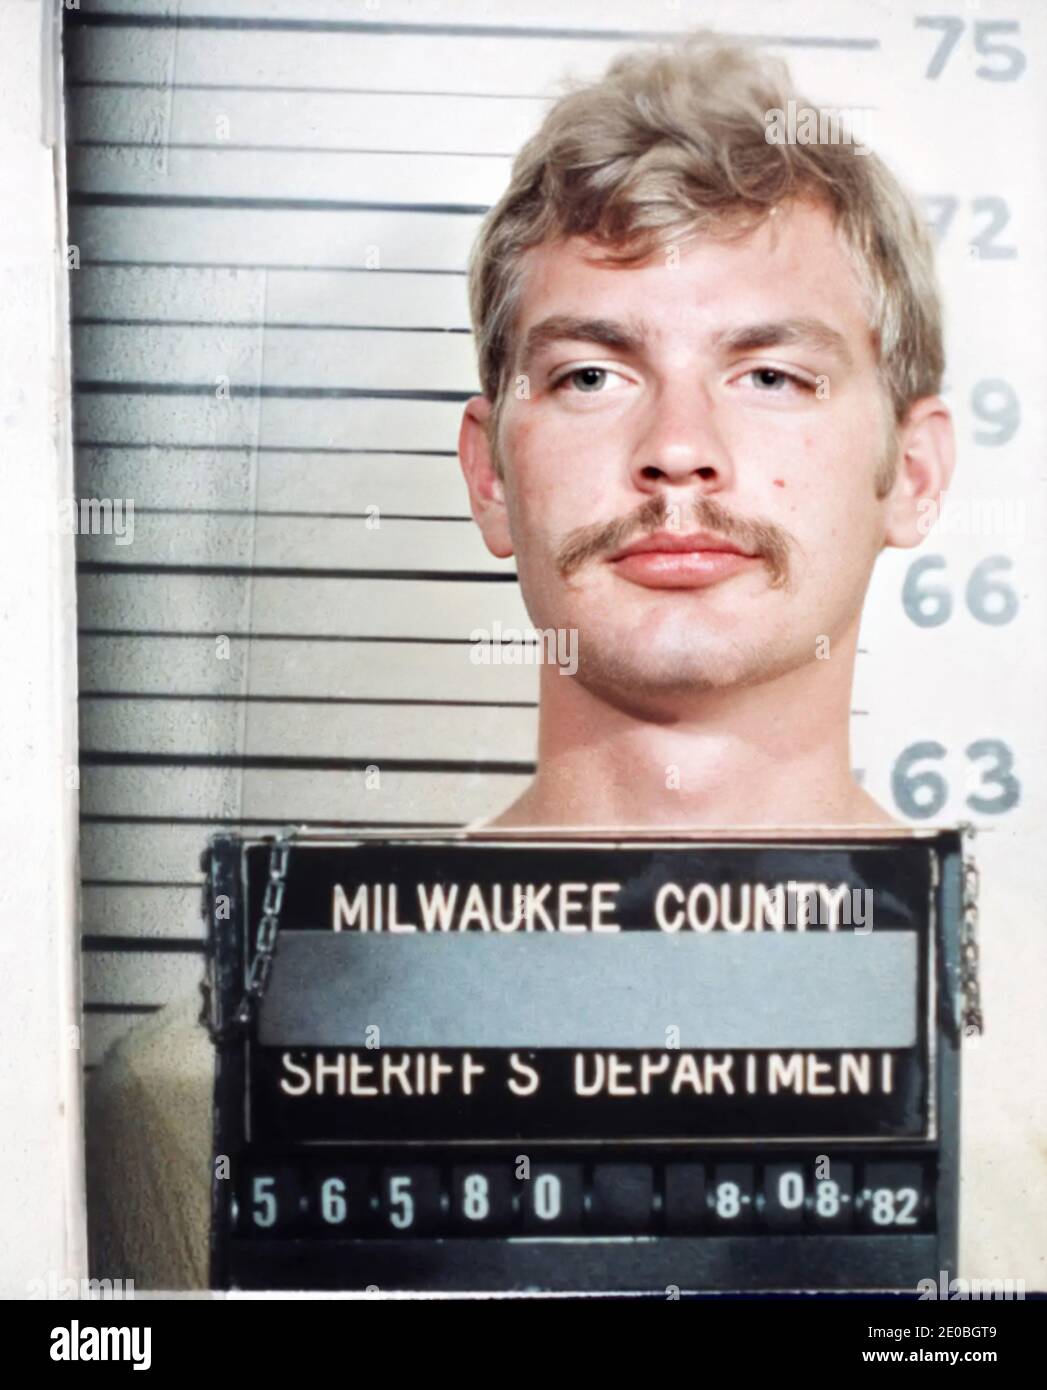 1982 , Milwaukee , USA : JEFFREY DAHMER aka the MILWAUKEE CANNIBAL ( 1960 - 1994 ) when was arrested  in a photobooth of Police Department the day 8 august 1982 . Dahmer was an American spree killer who murdered at least 17 people , from 1978 to 1991 . - Mostro di Milwaukee - SERIAL KILLER - The Monster of - portrait - ritratto - serial-killer - assassino seriale - CRONACA NERA - criminale - criminal - SERIAL KILLER  - GAY - LGBT - CANNIBALE - cannibalismo - omosessuale - omosessualità - homosexuality - homosexual - foto segnaletica della Polizia - photo booth --- Archivio GBB Stock Photo